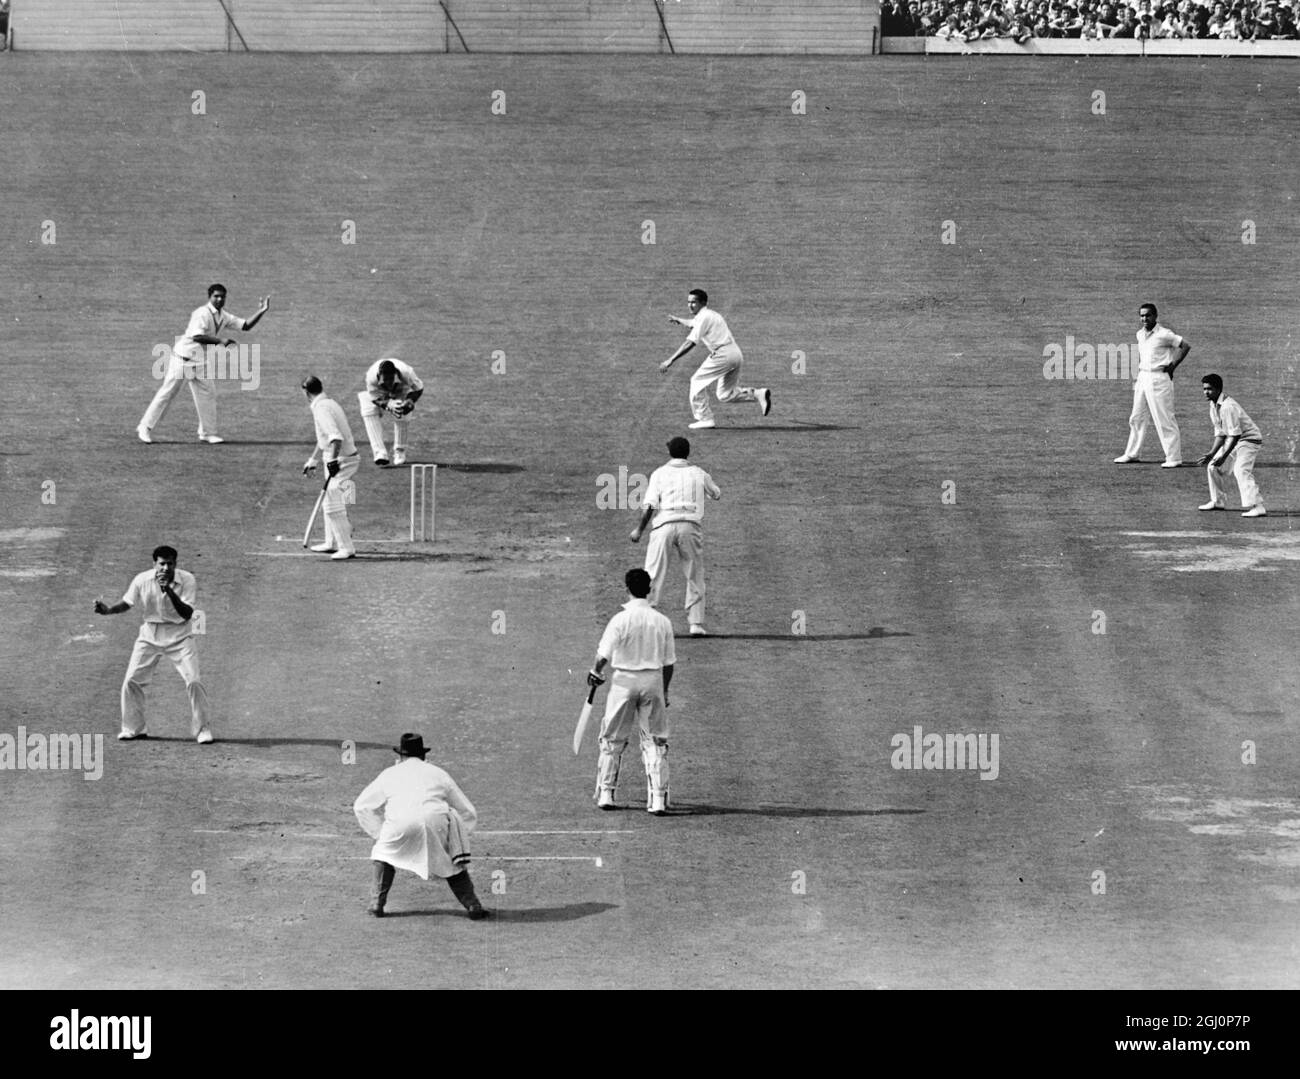 London ; Len Hutton , England Captain , survives an appeal off Fazal Mahmood in the first over during England ' s second innings against Pakistan in the final Test Match . 16 August , 1954 Stock Photo